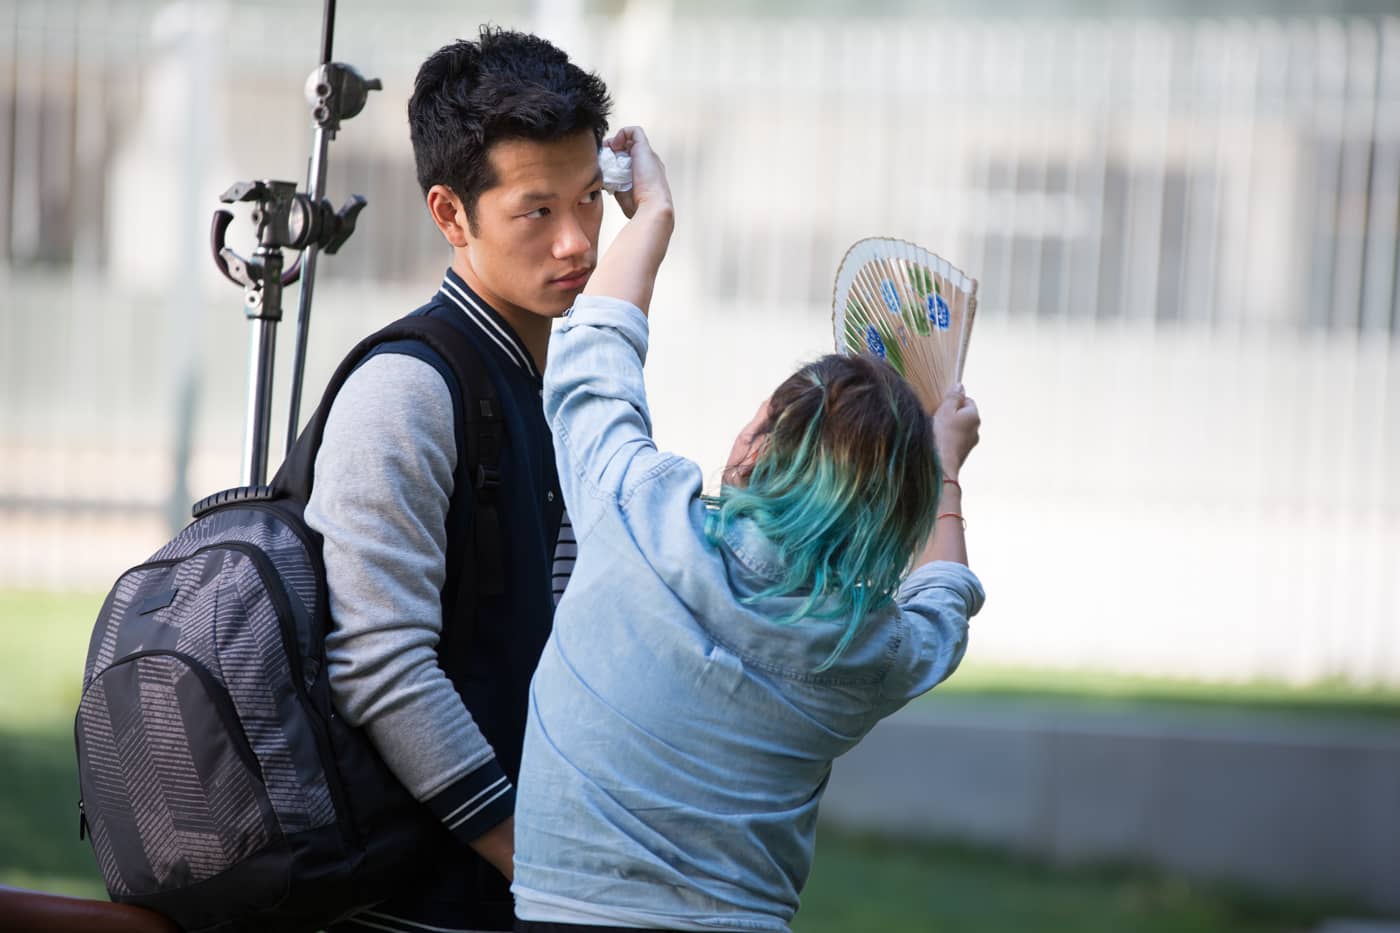 Blue-haired makeup artist applying make-up to young man